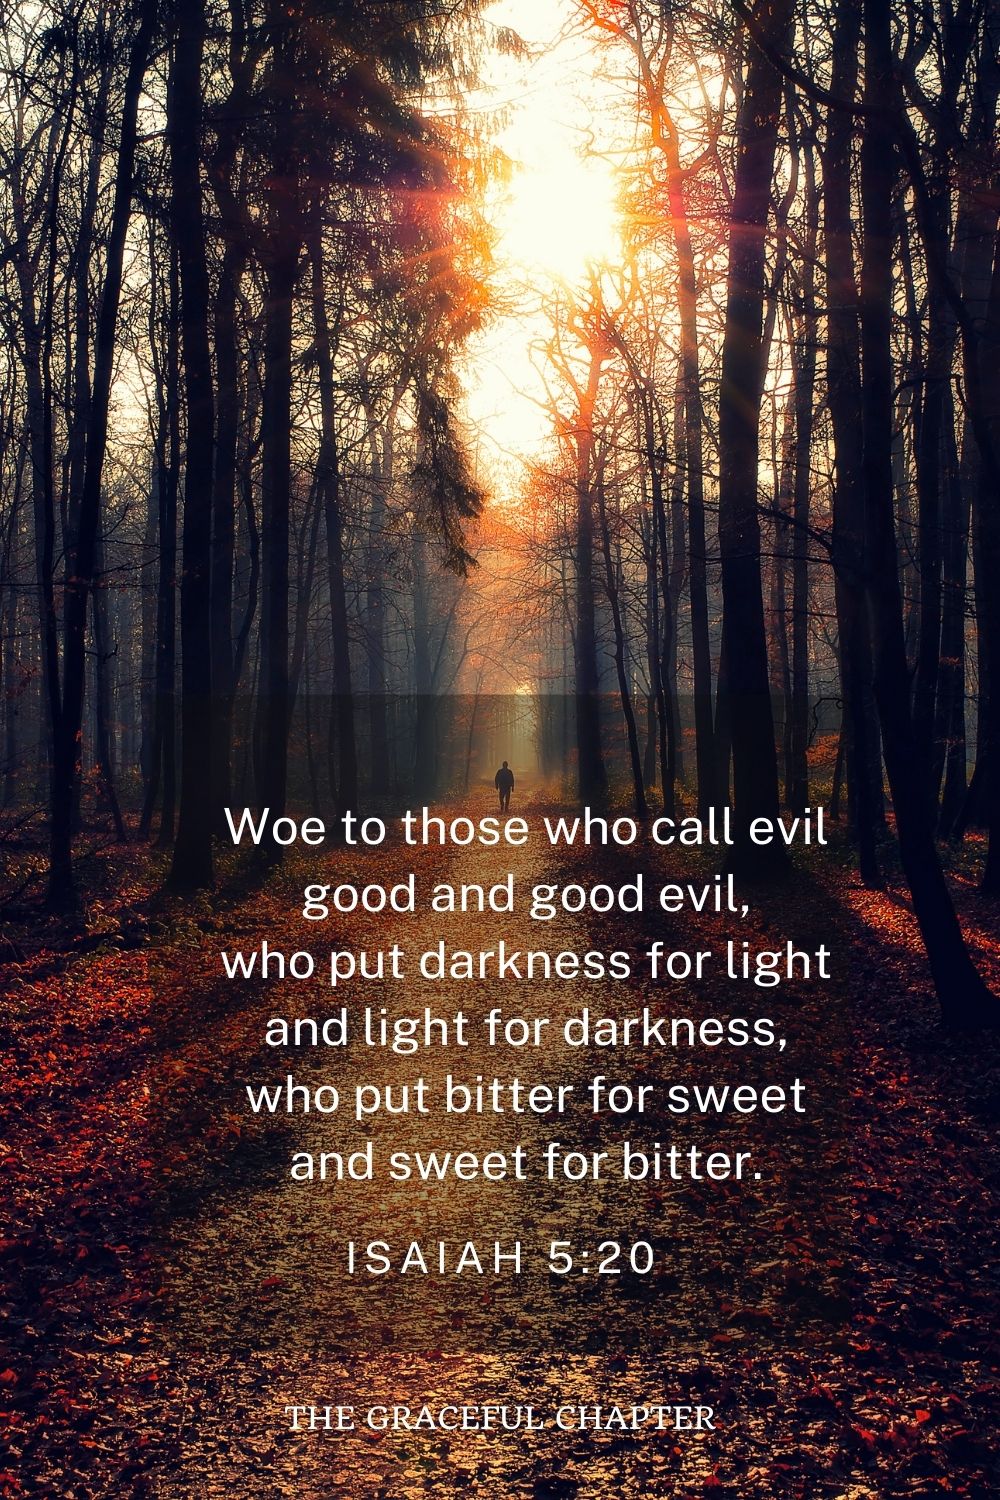 Woe to those who call evil good and good evil, who put darkness for light and light for darkness, who put bitter for sweet and sweet for bitter. Isaiah 5:20